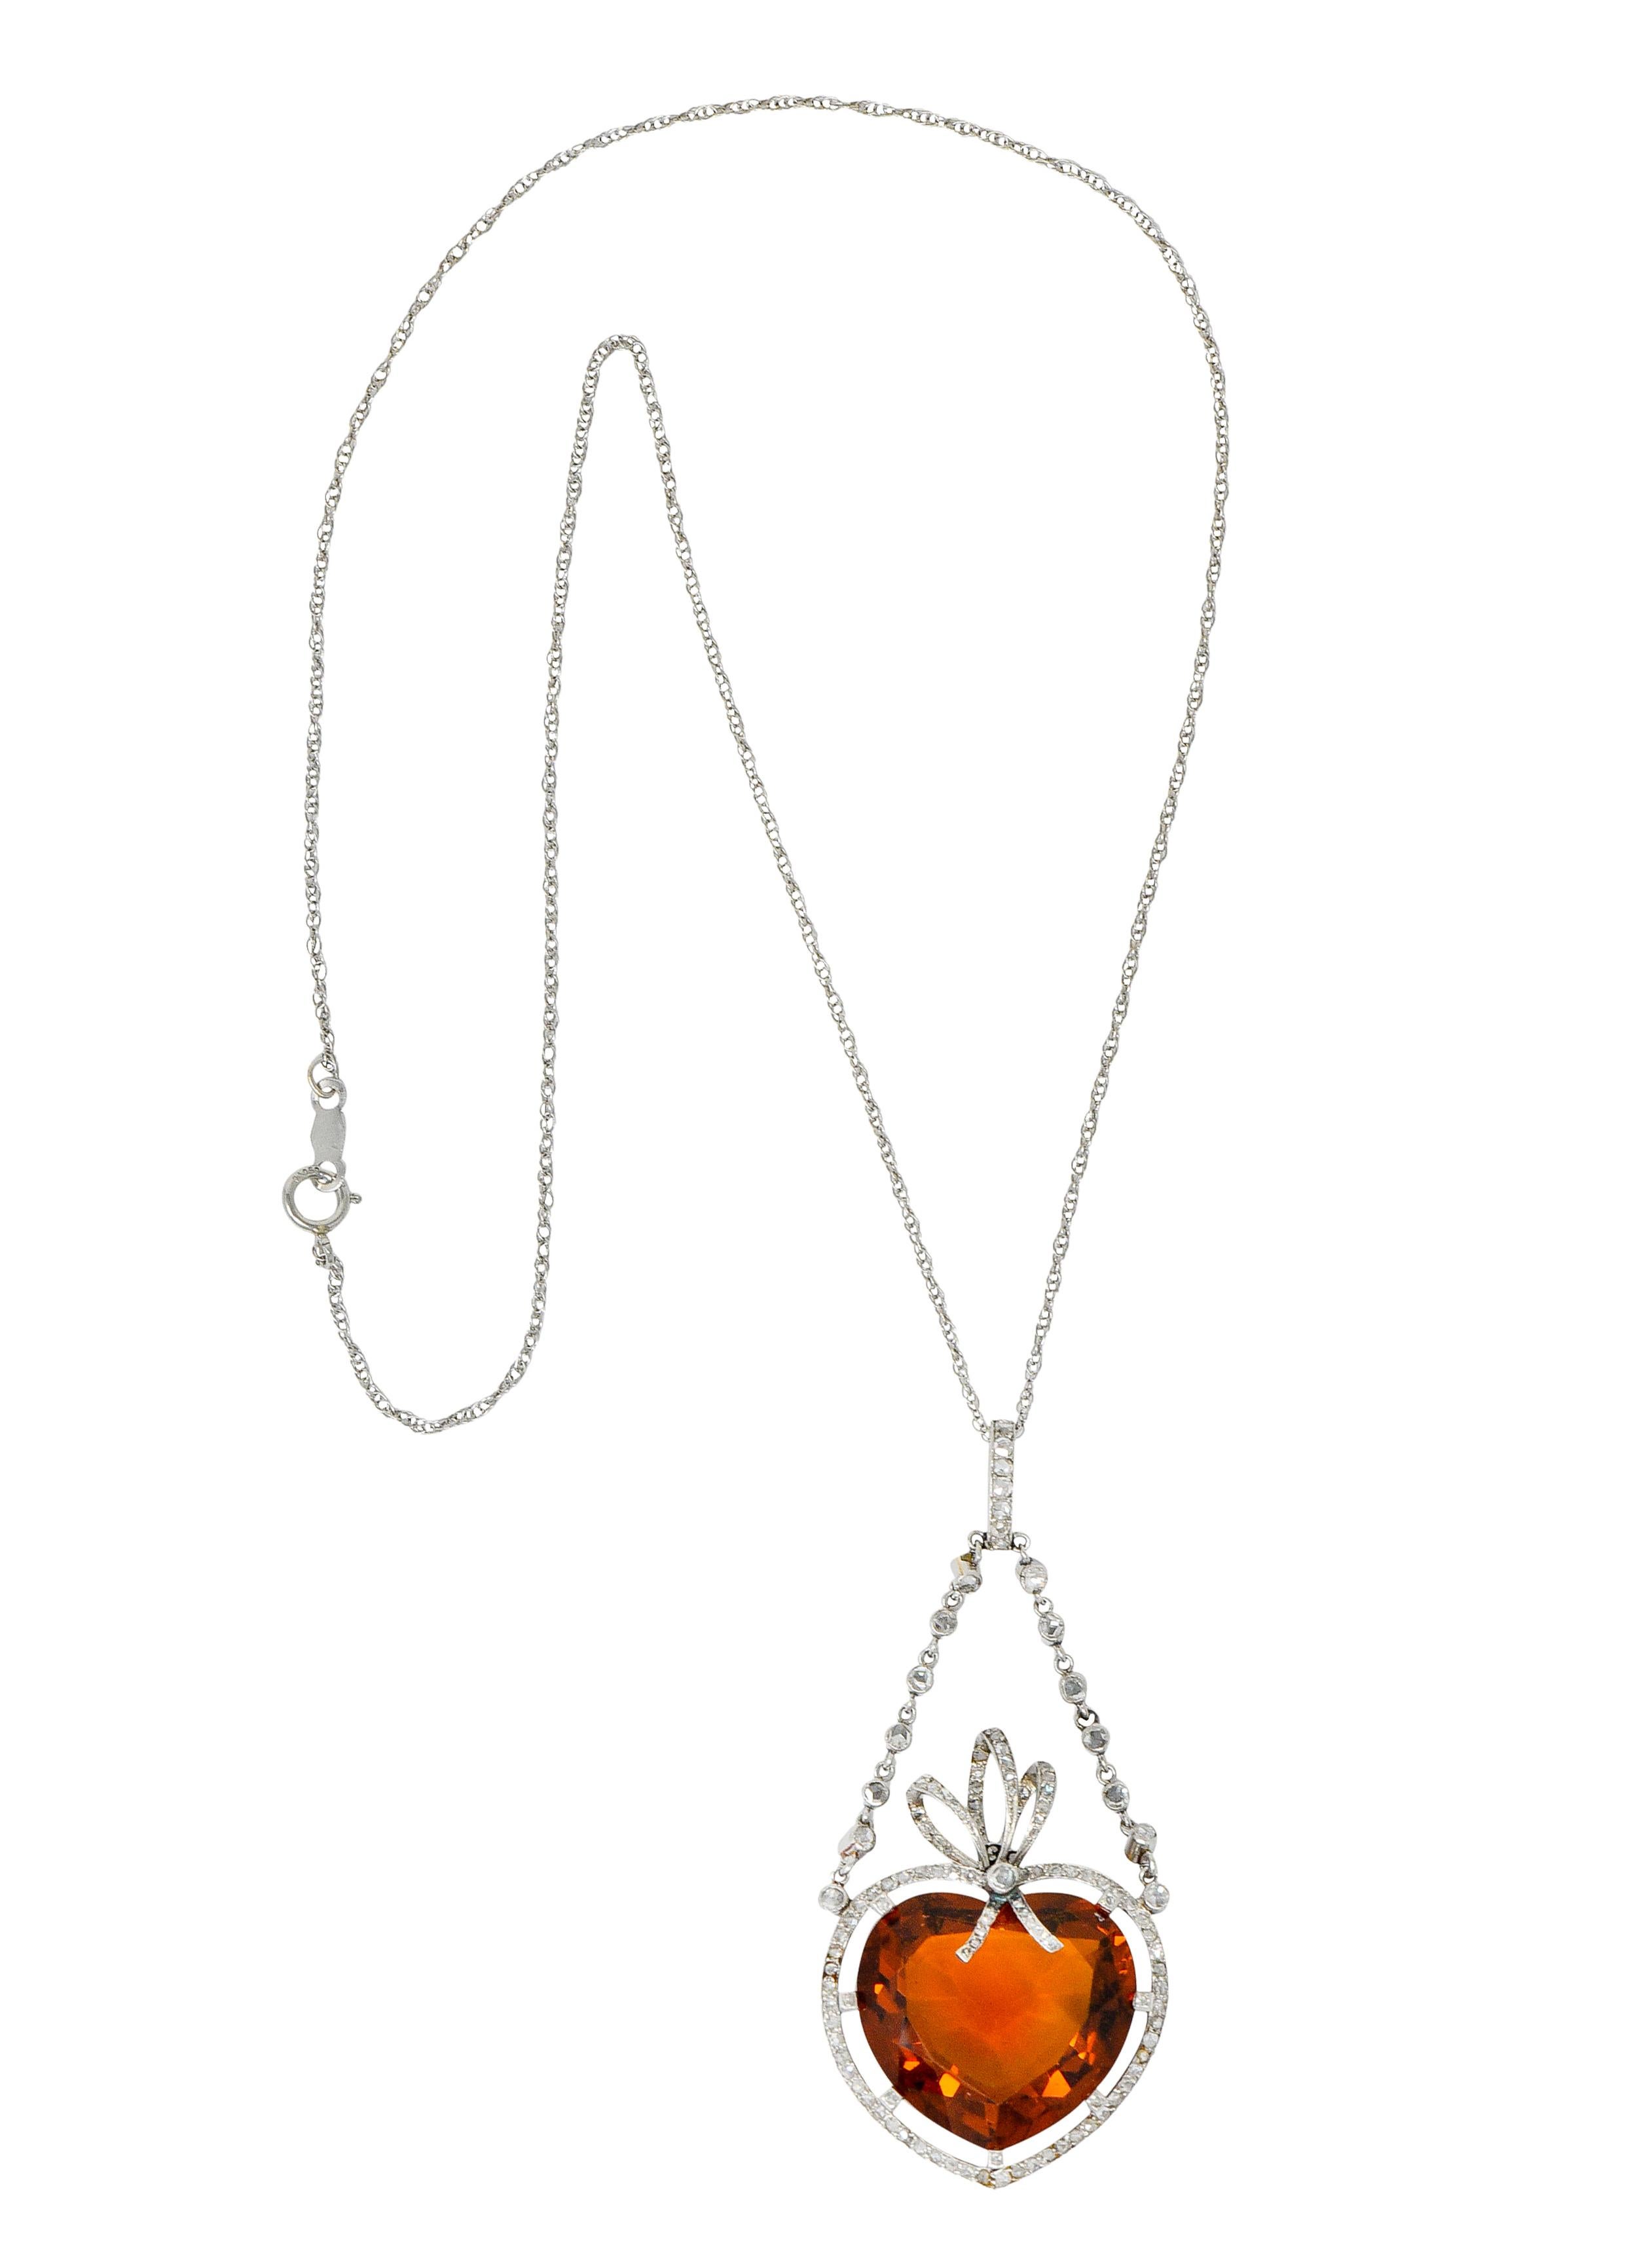 Centering a mixed heart cut citrine weighing approximately 12.00 carats, transparent and medium-dark with slightly brownish-orange color

Surrounded by a diamond halo that terminates as a ribboned bow at top of heart, suspending from two bezel link